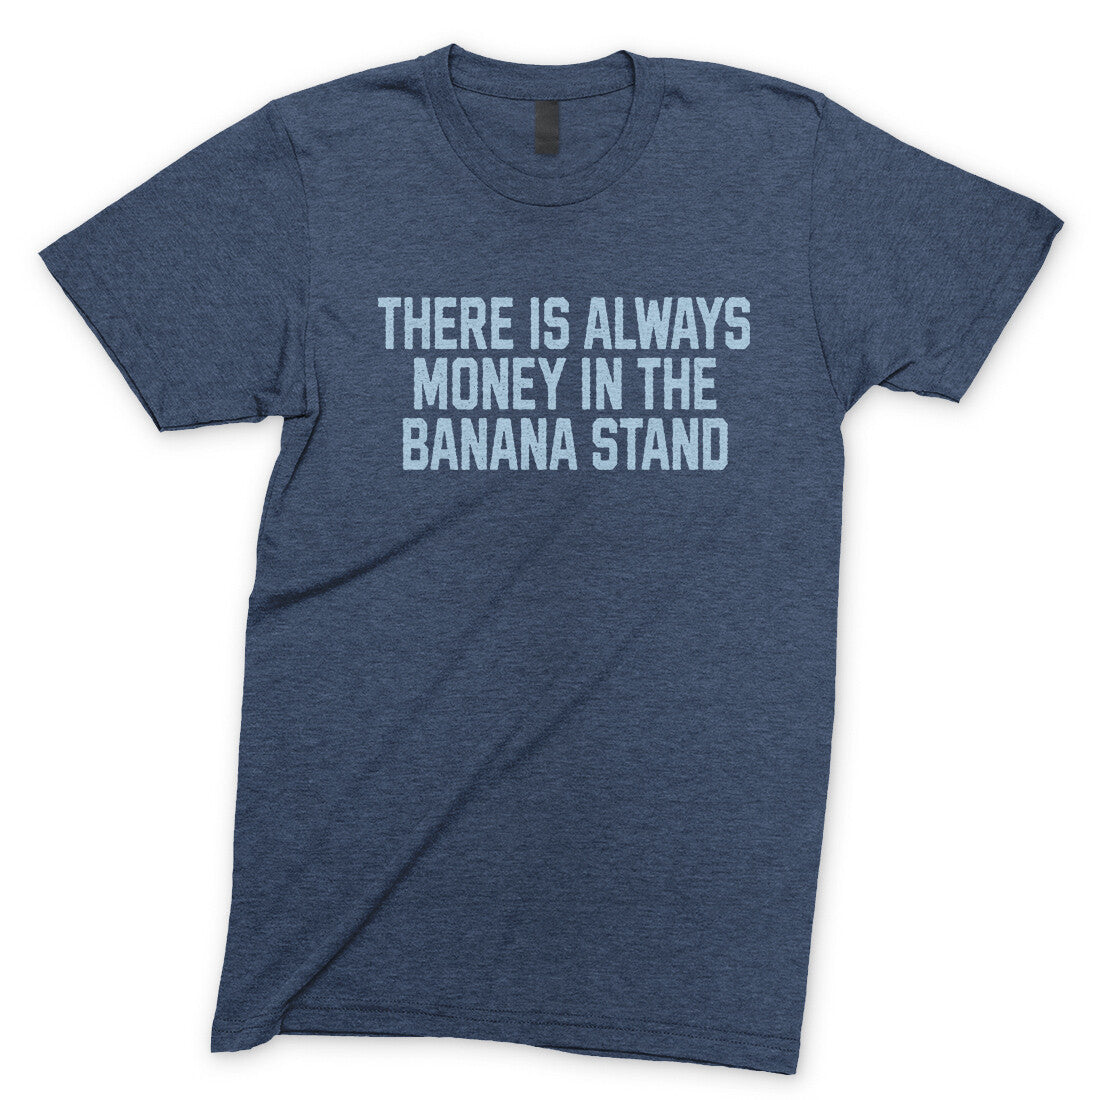 There is Always Money in the Banana Stand in Navy Heather Color